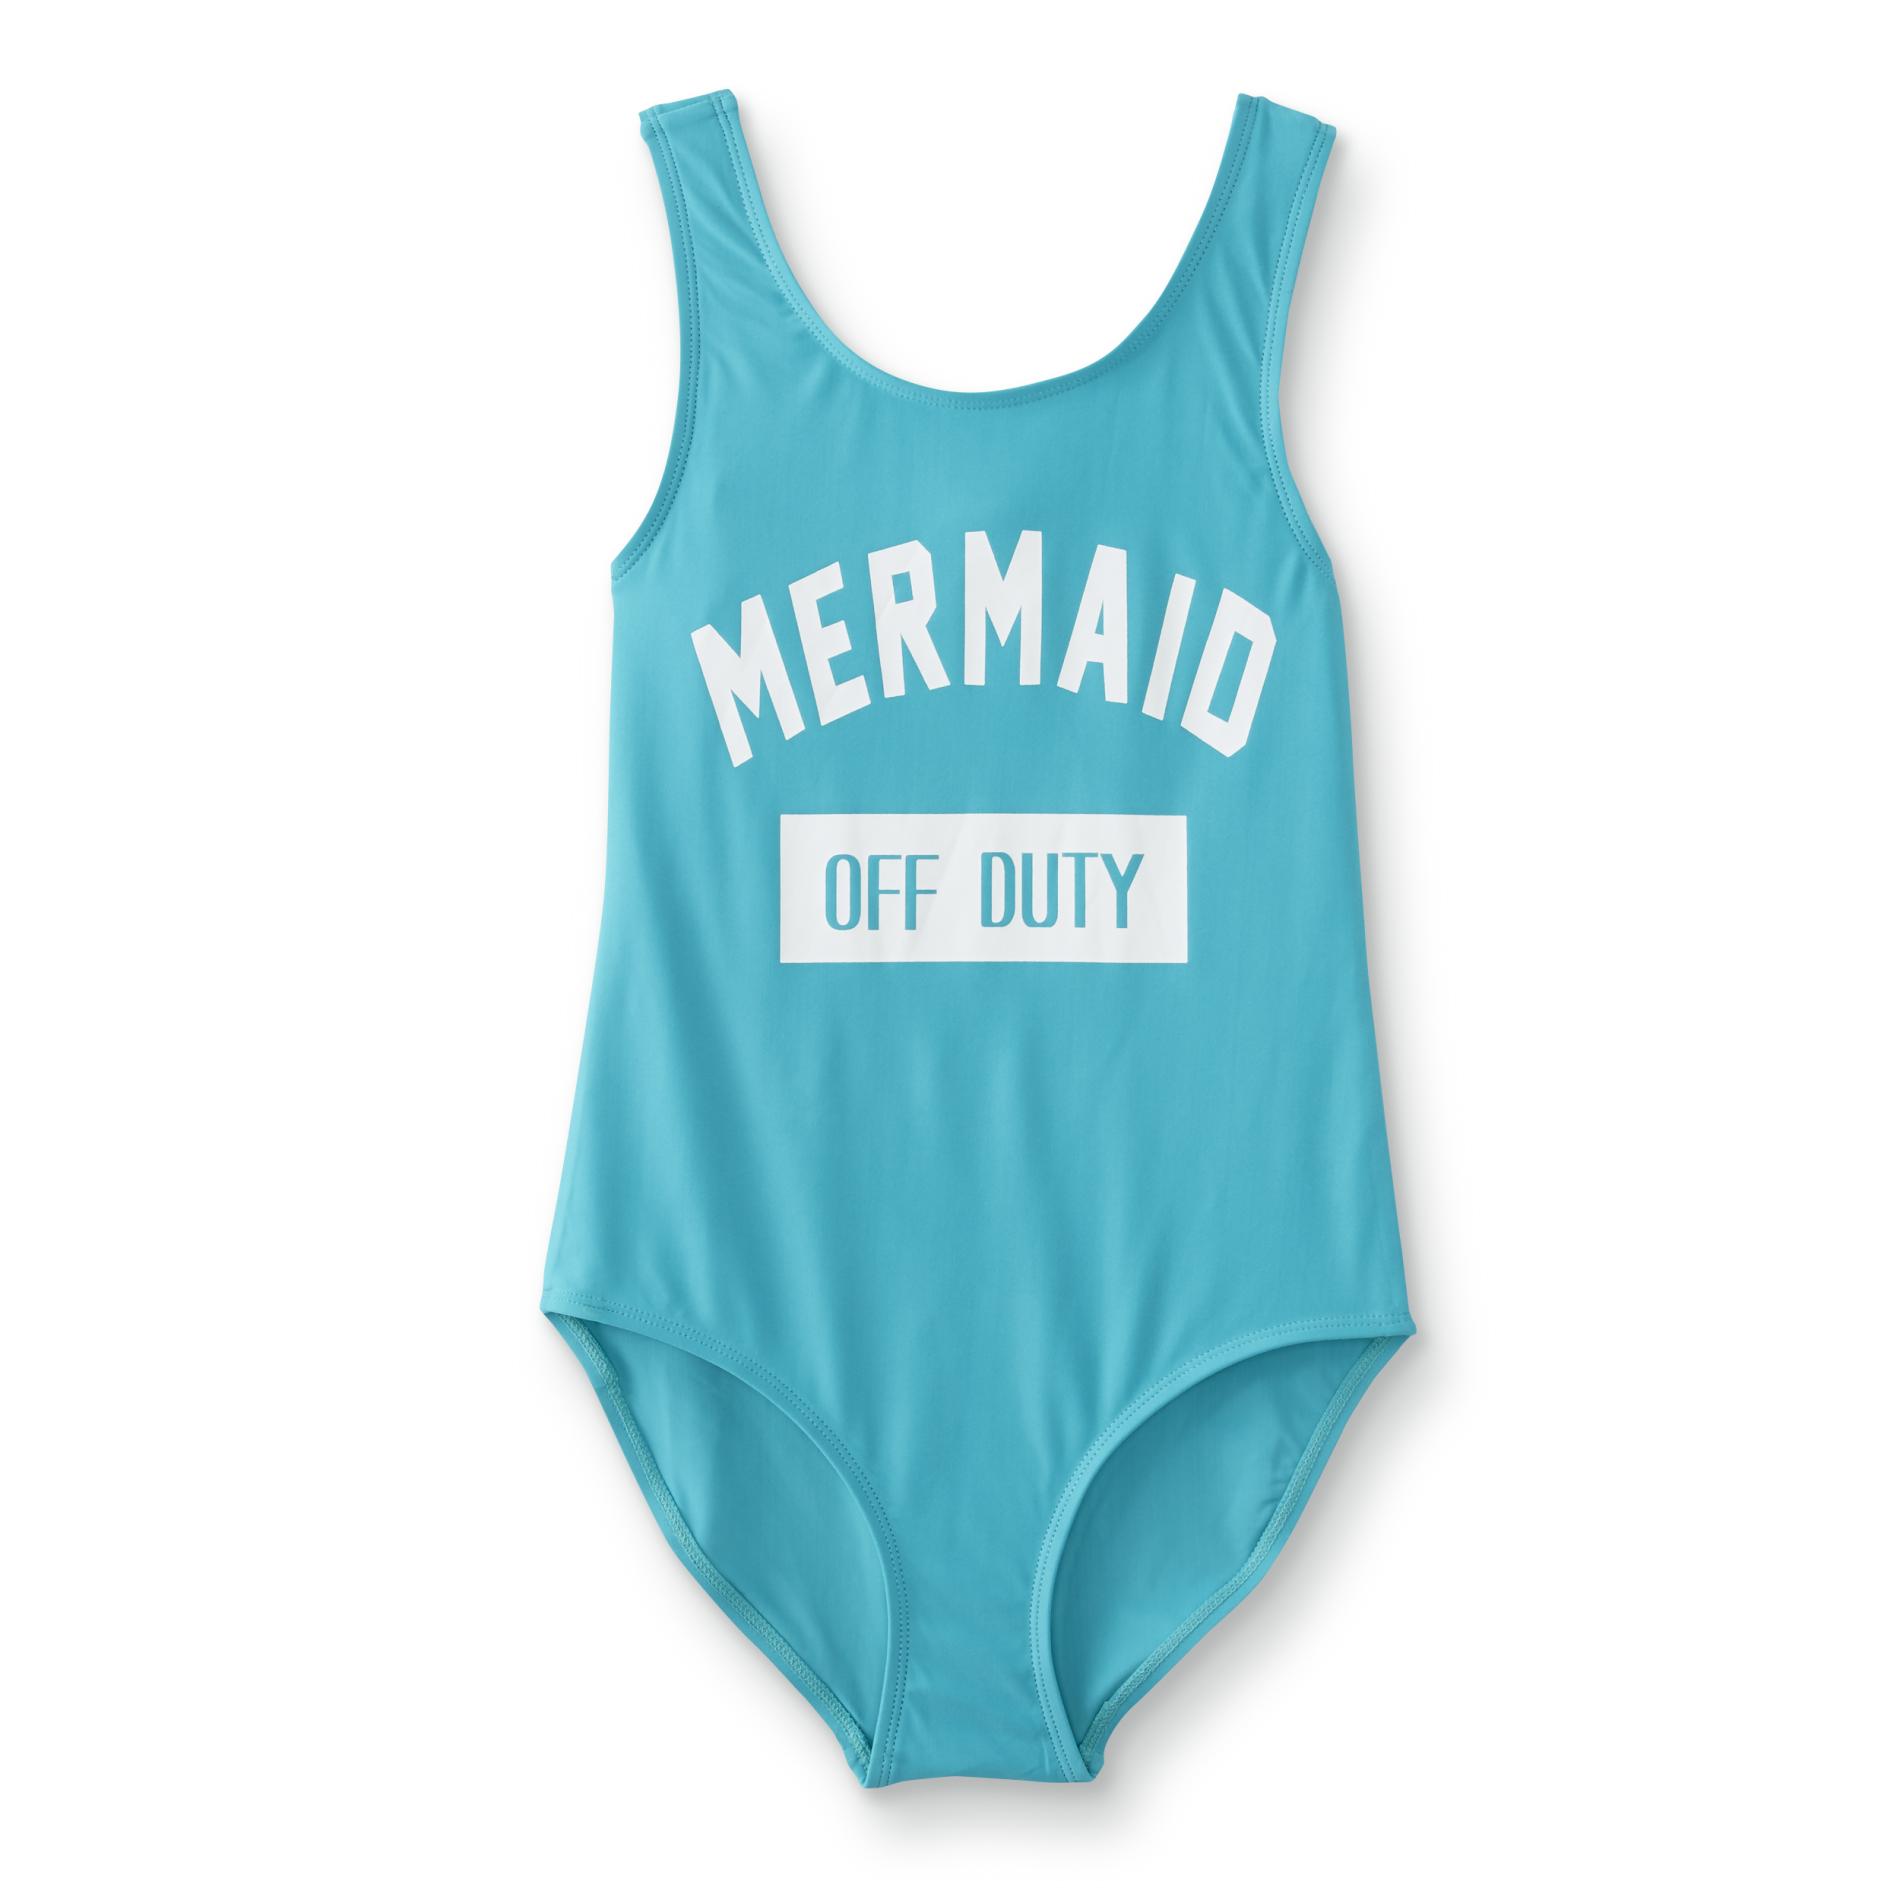 Simply Styled Girls' One-Piece Swimsuit - Mermaid